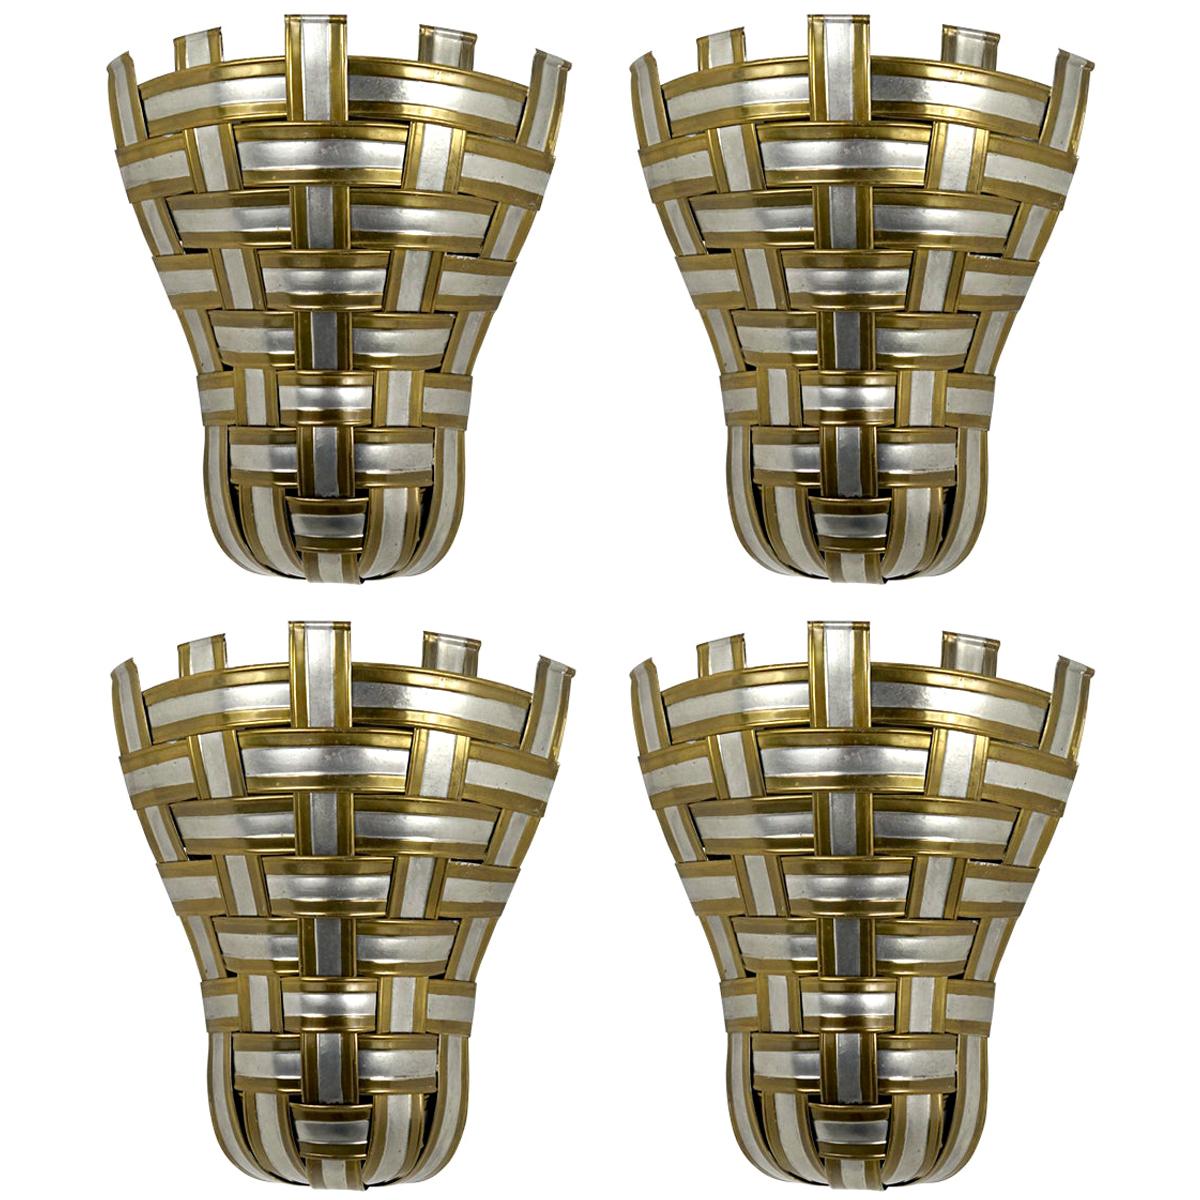 Set of 4 Hollywood Regency Corner Sconces Made of Interwoven Aluminium and Brass For Sale